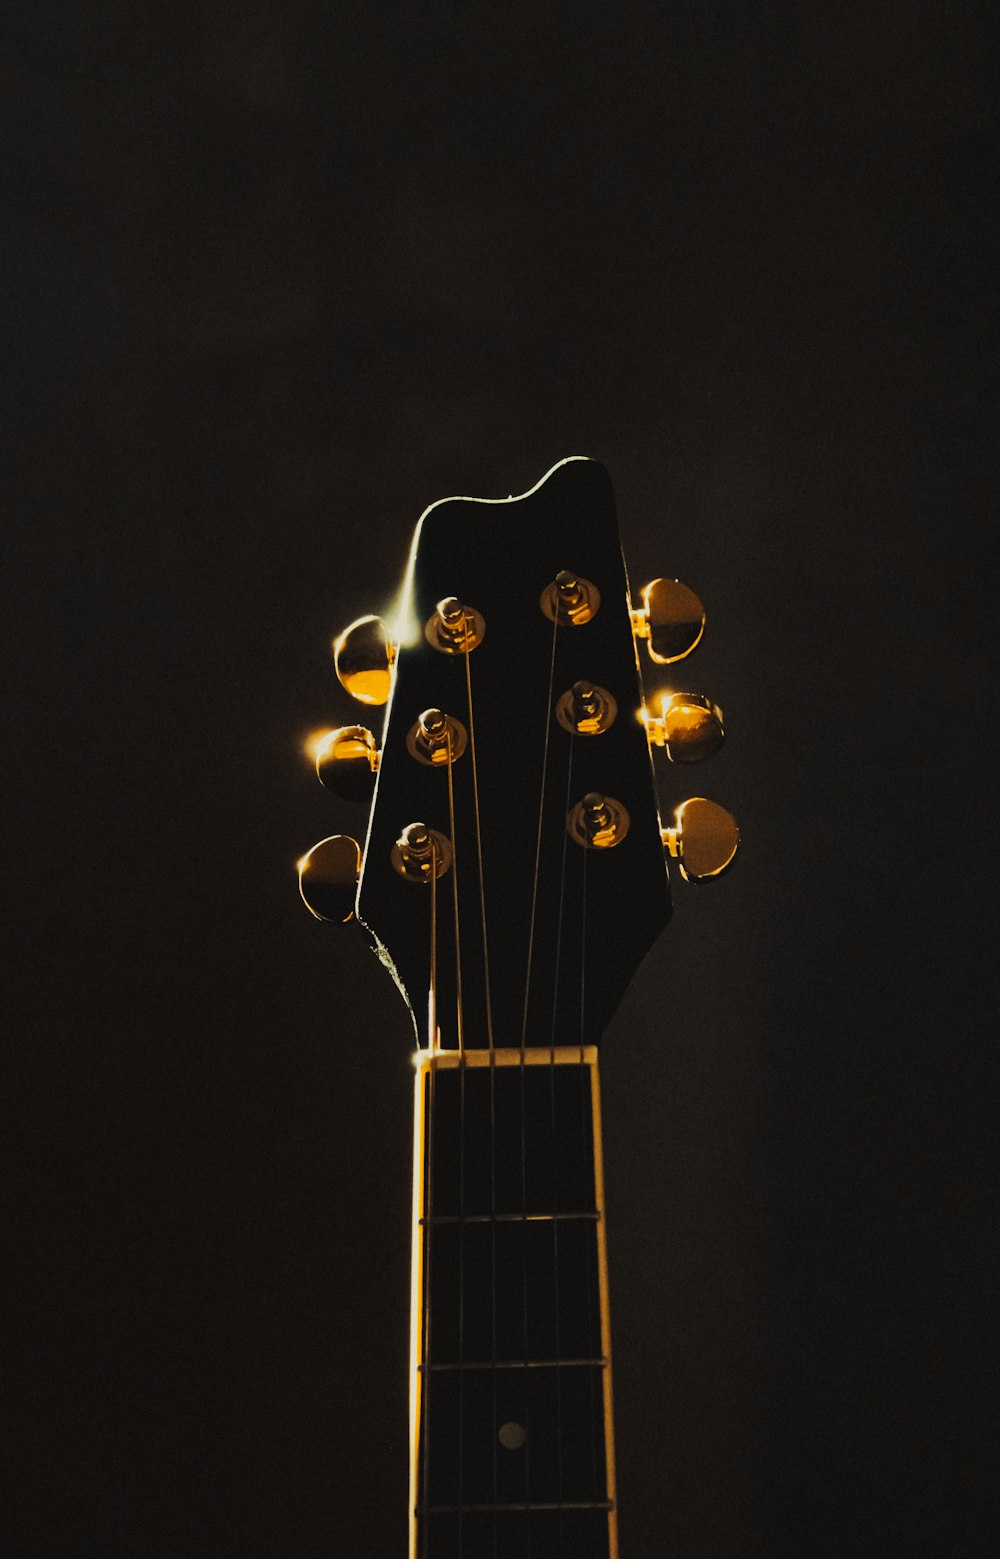 a close up of a guitar's neck in the dark